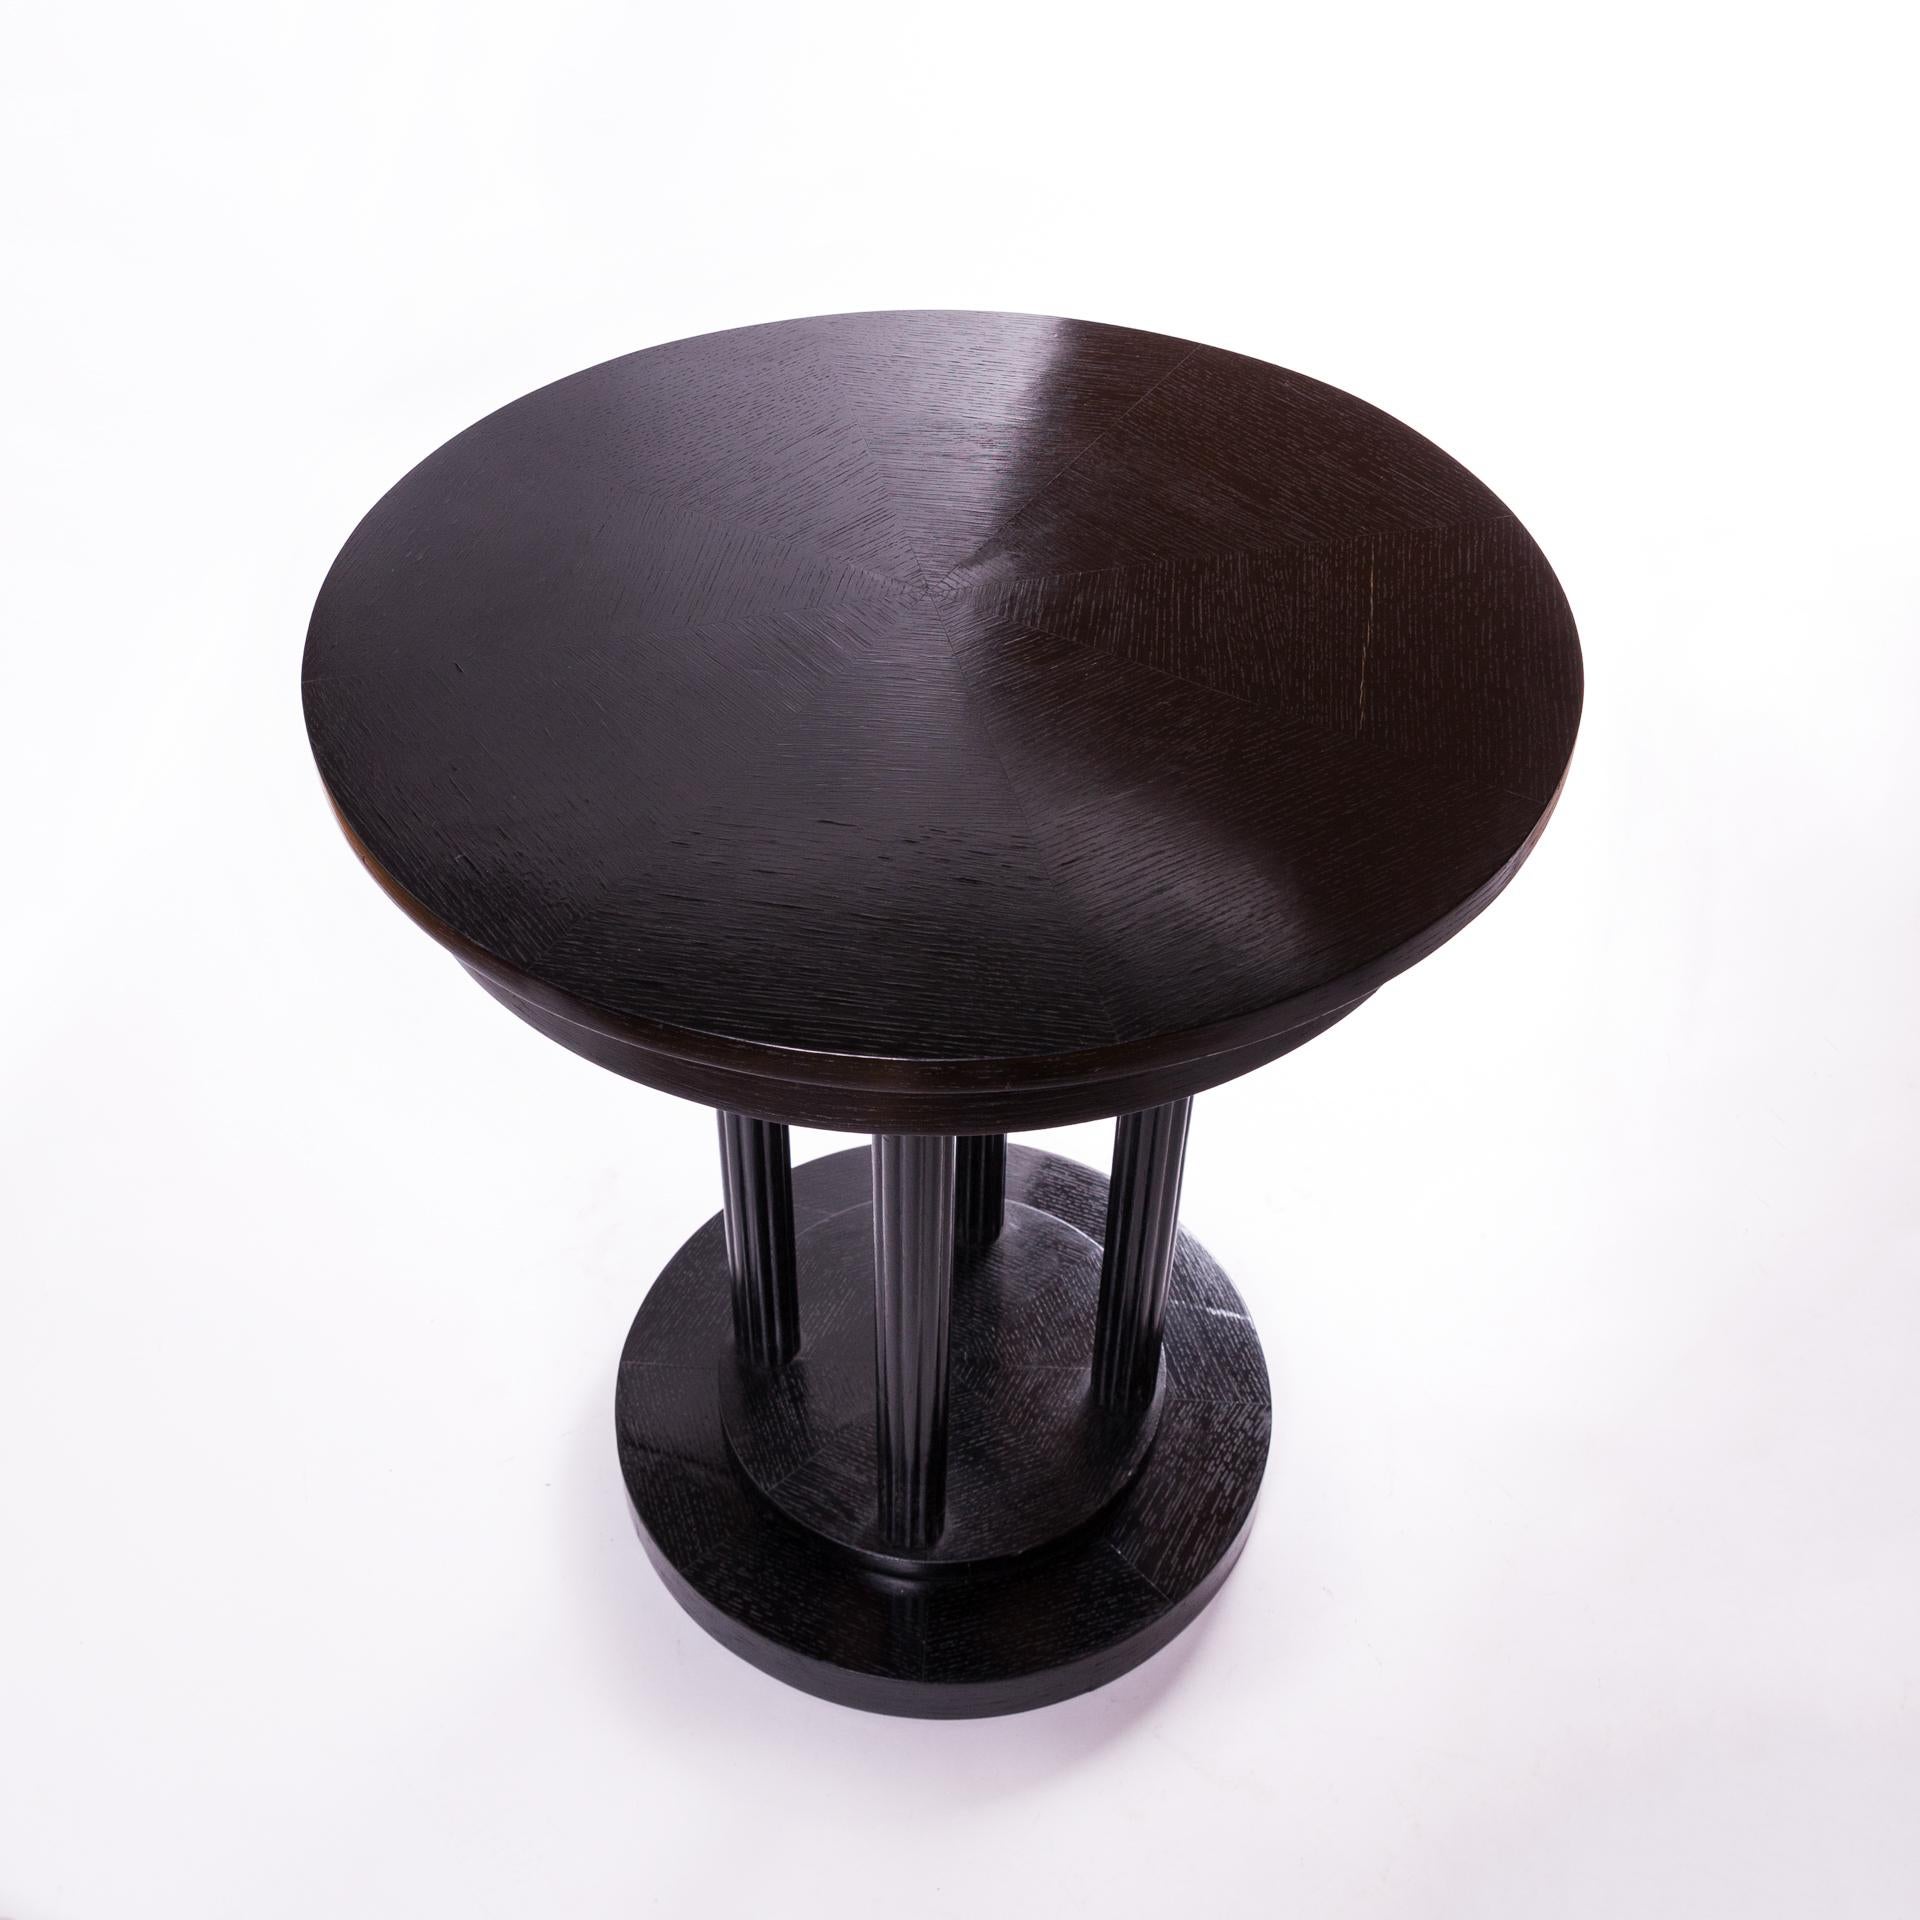 Veneer Art Deco Black Table, Viennese Thonet Style, circa 1910-20, Varnished wood For Sale